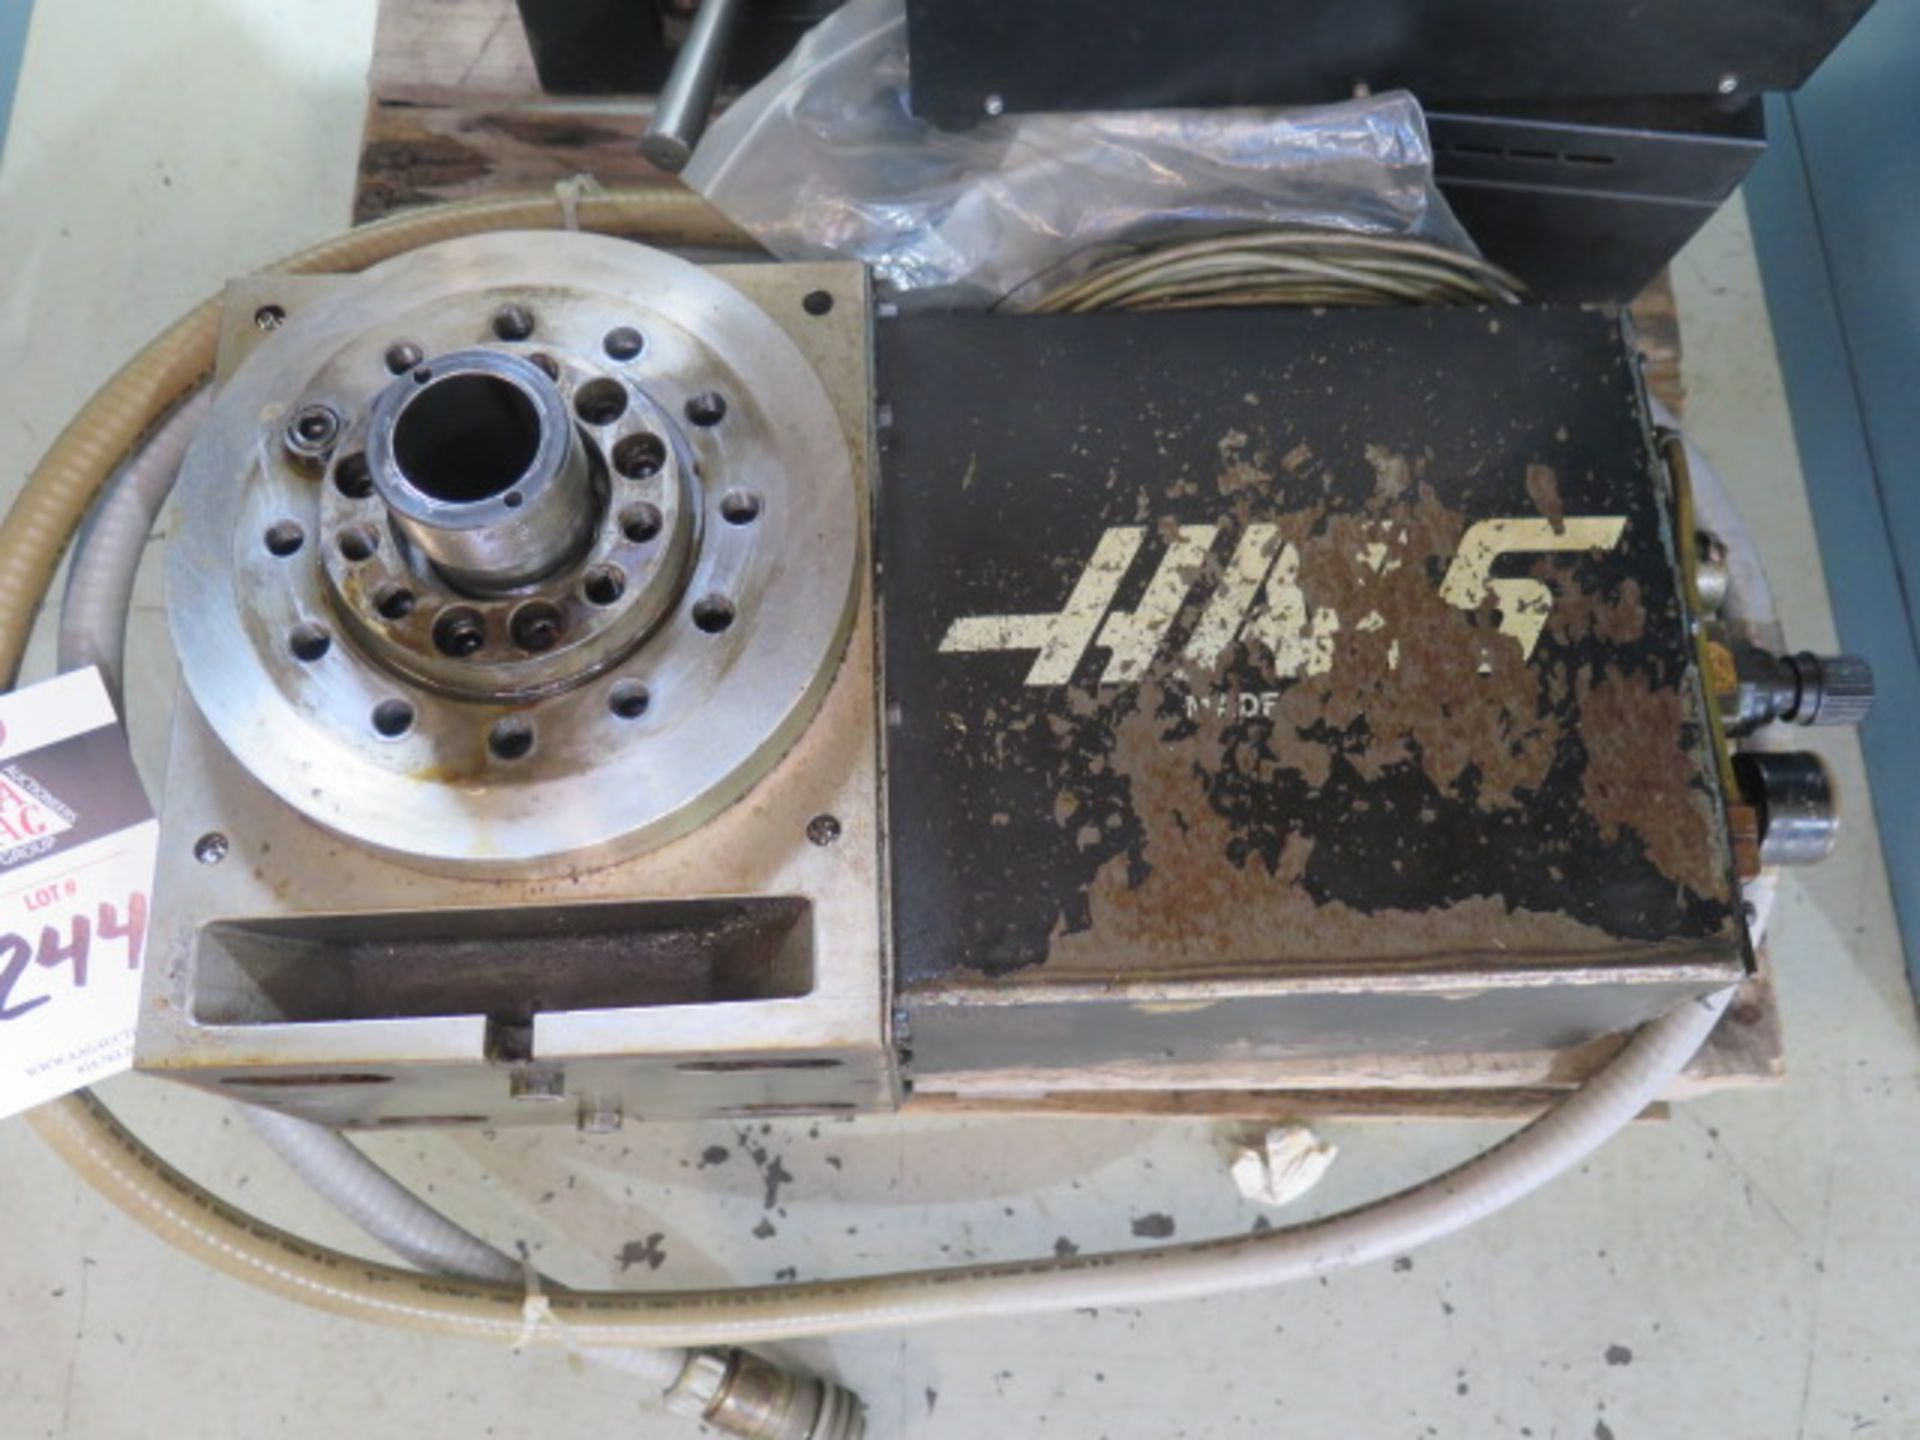 Haas 4th Axis 8" Rotary Table and 5C Rotary Head (NOT RUNNING - BOTH NEED REPAIRS) w/ Servo - Image 2 of 9